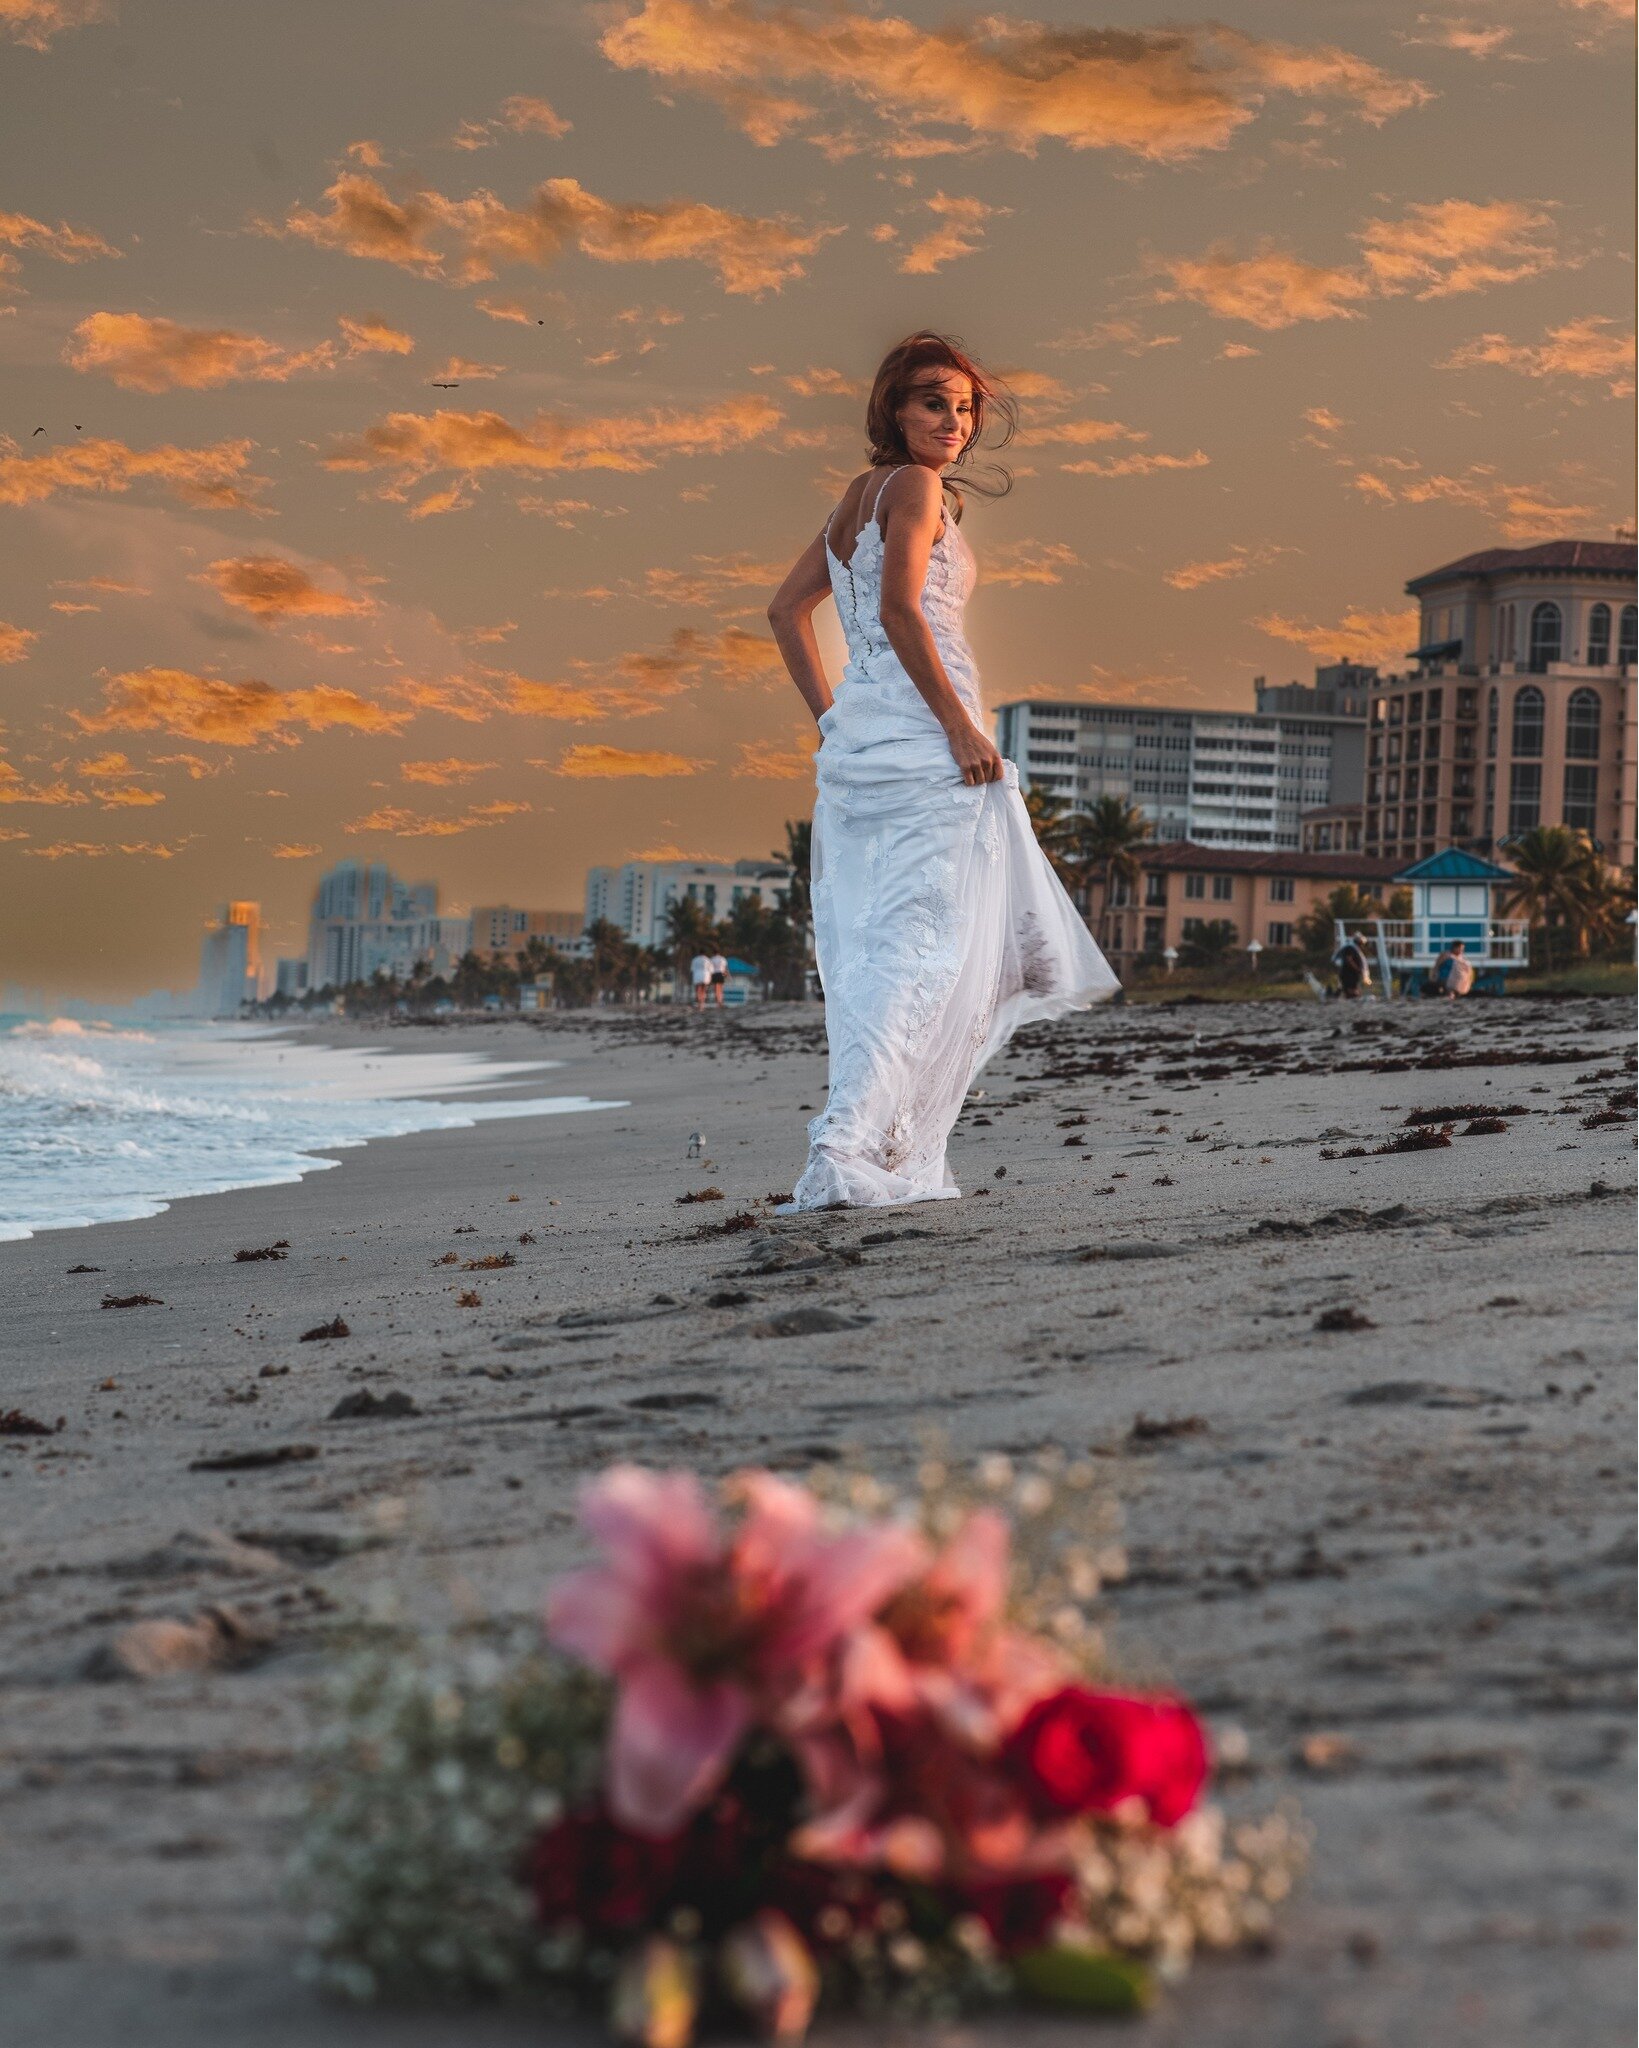 &quot;#BeachWedding&quot; by Melissa B.
Orange and yellow blossoms
carried in her hands
were watered by happy tears
barefoot in the sand

Tear filled eyes upon his bride
simple slip-like dress
his heart filled with only her
unaware of guests

@junebr